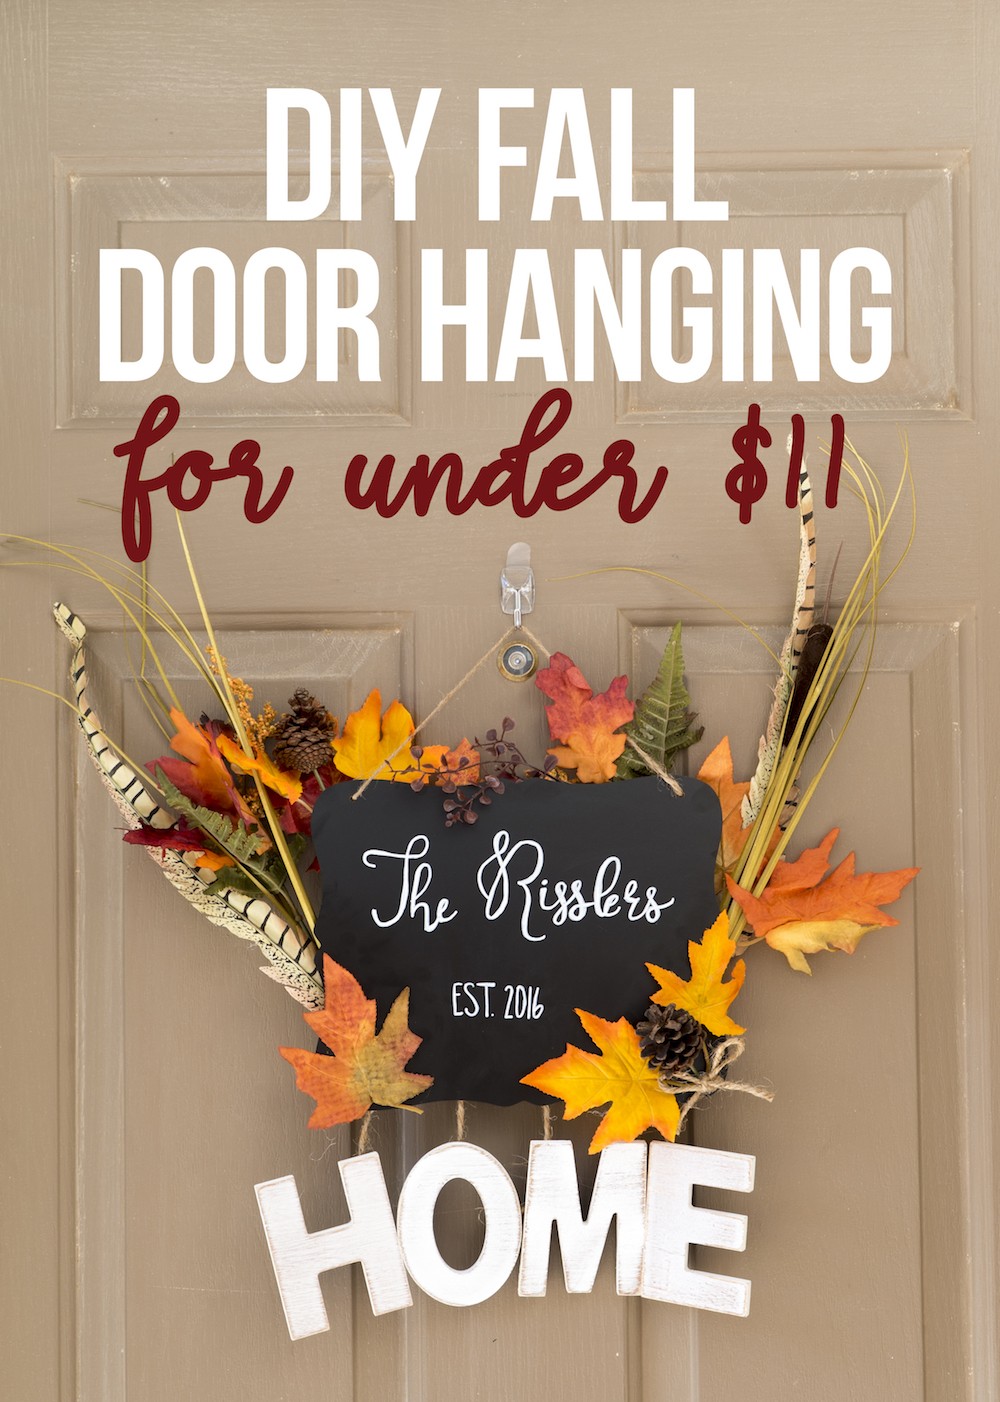 Materials from Amazon for the DIY Fall Door Hanging
(affiliate links):